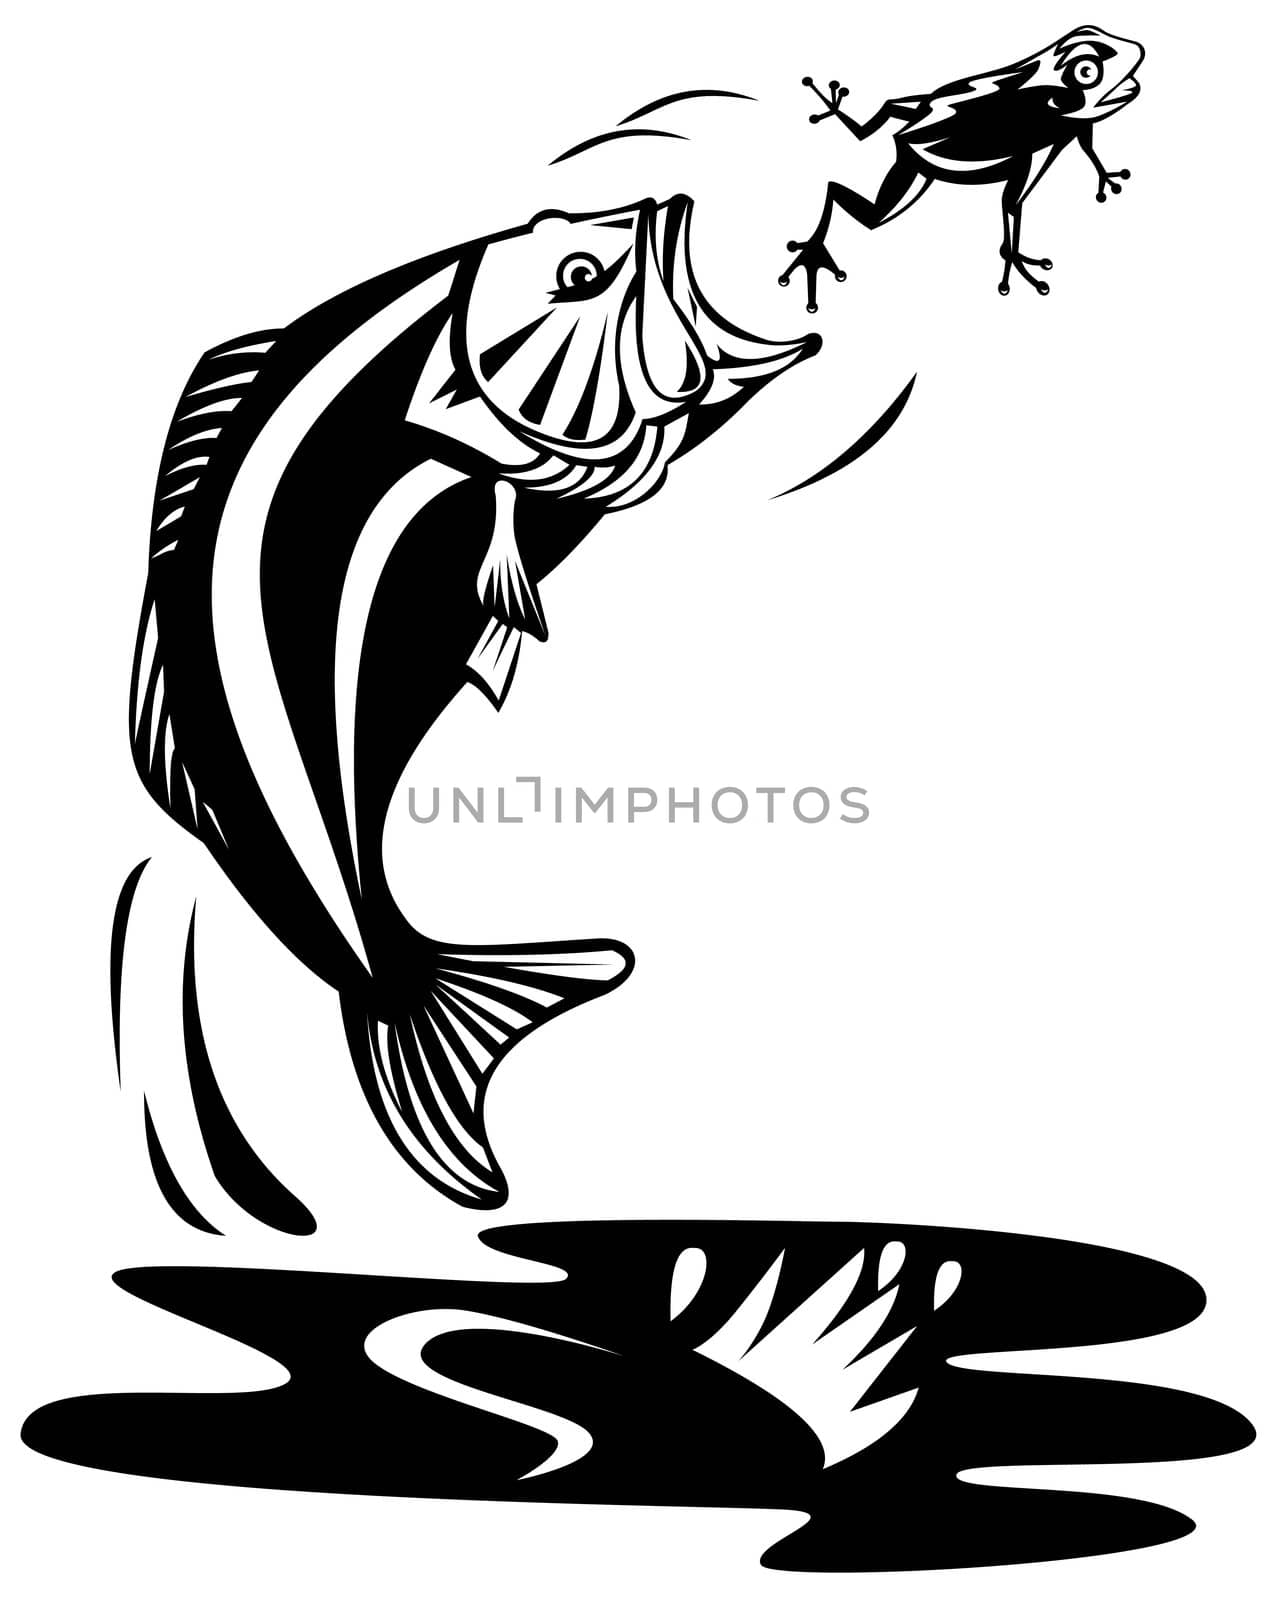 illustration of a largemouth bass jumping catching frog done in retro style